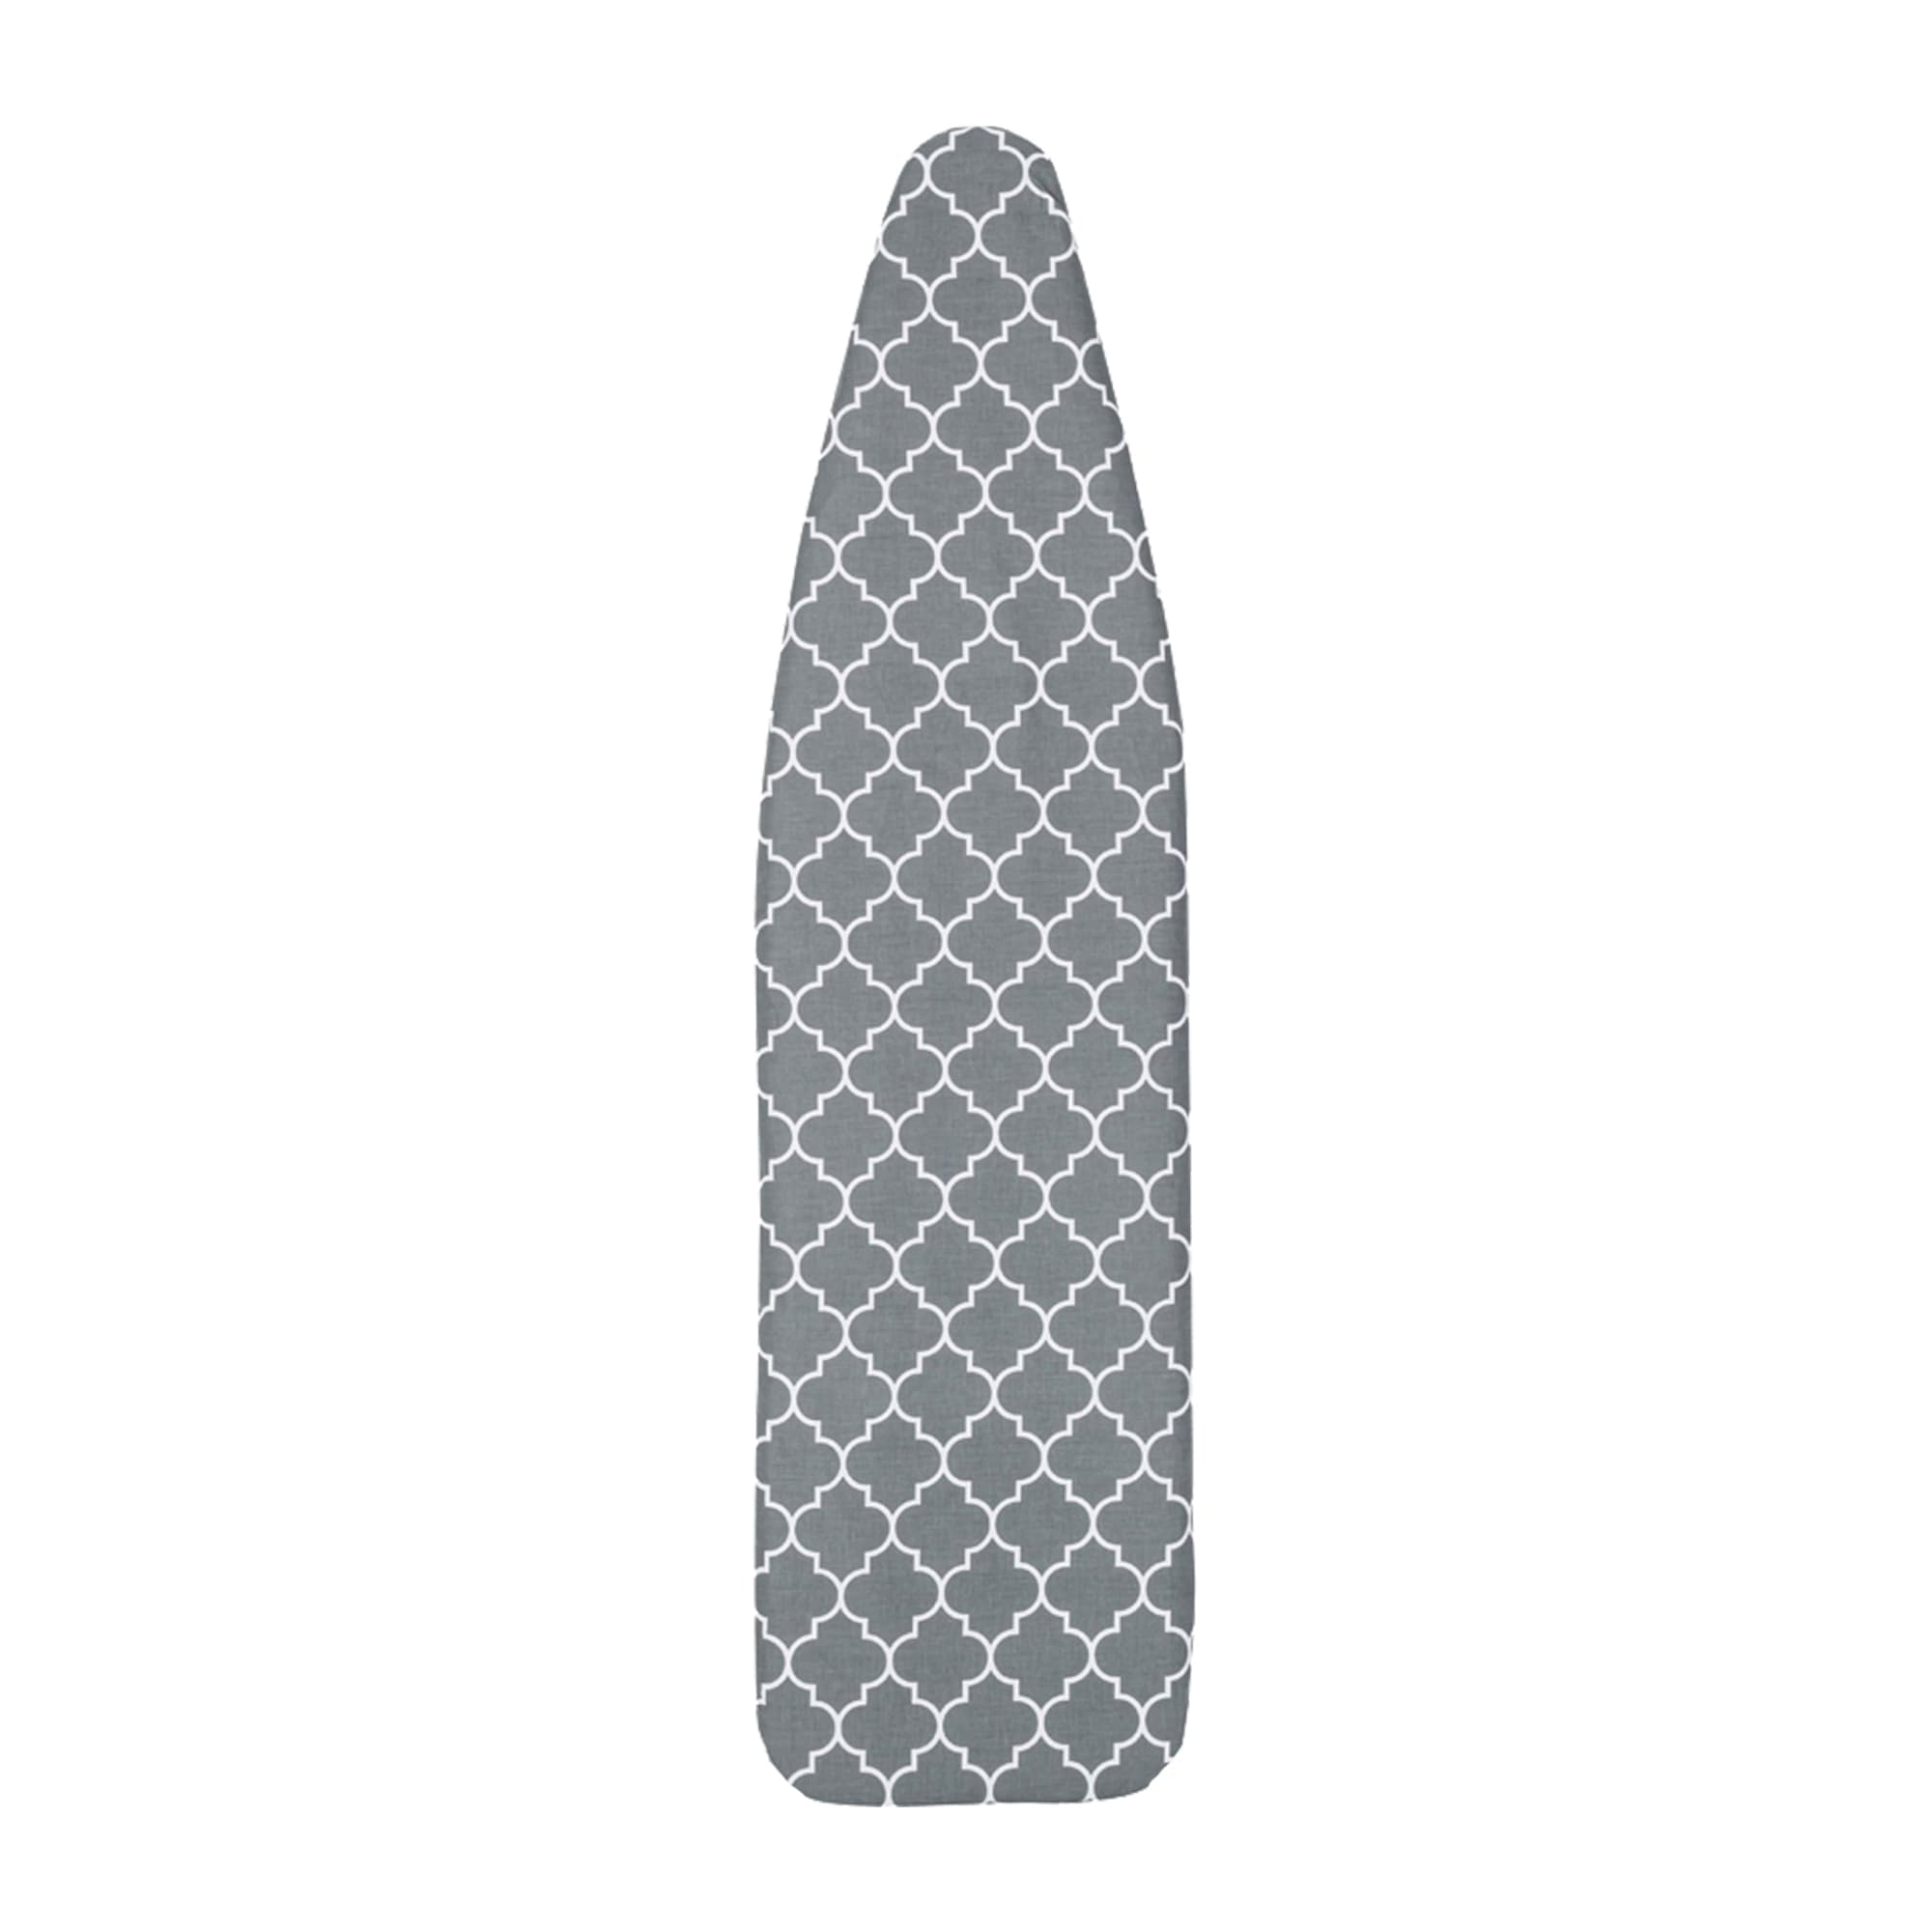 Seymour Home Products Ultimate Replacement Cover and Pad, Grey Lattice, Fits 53"-54" X 13"-14" $10.00 EACH, CASE PACK OF 6